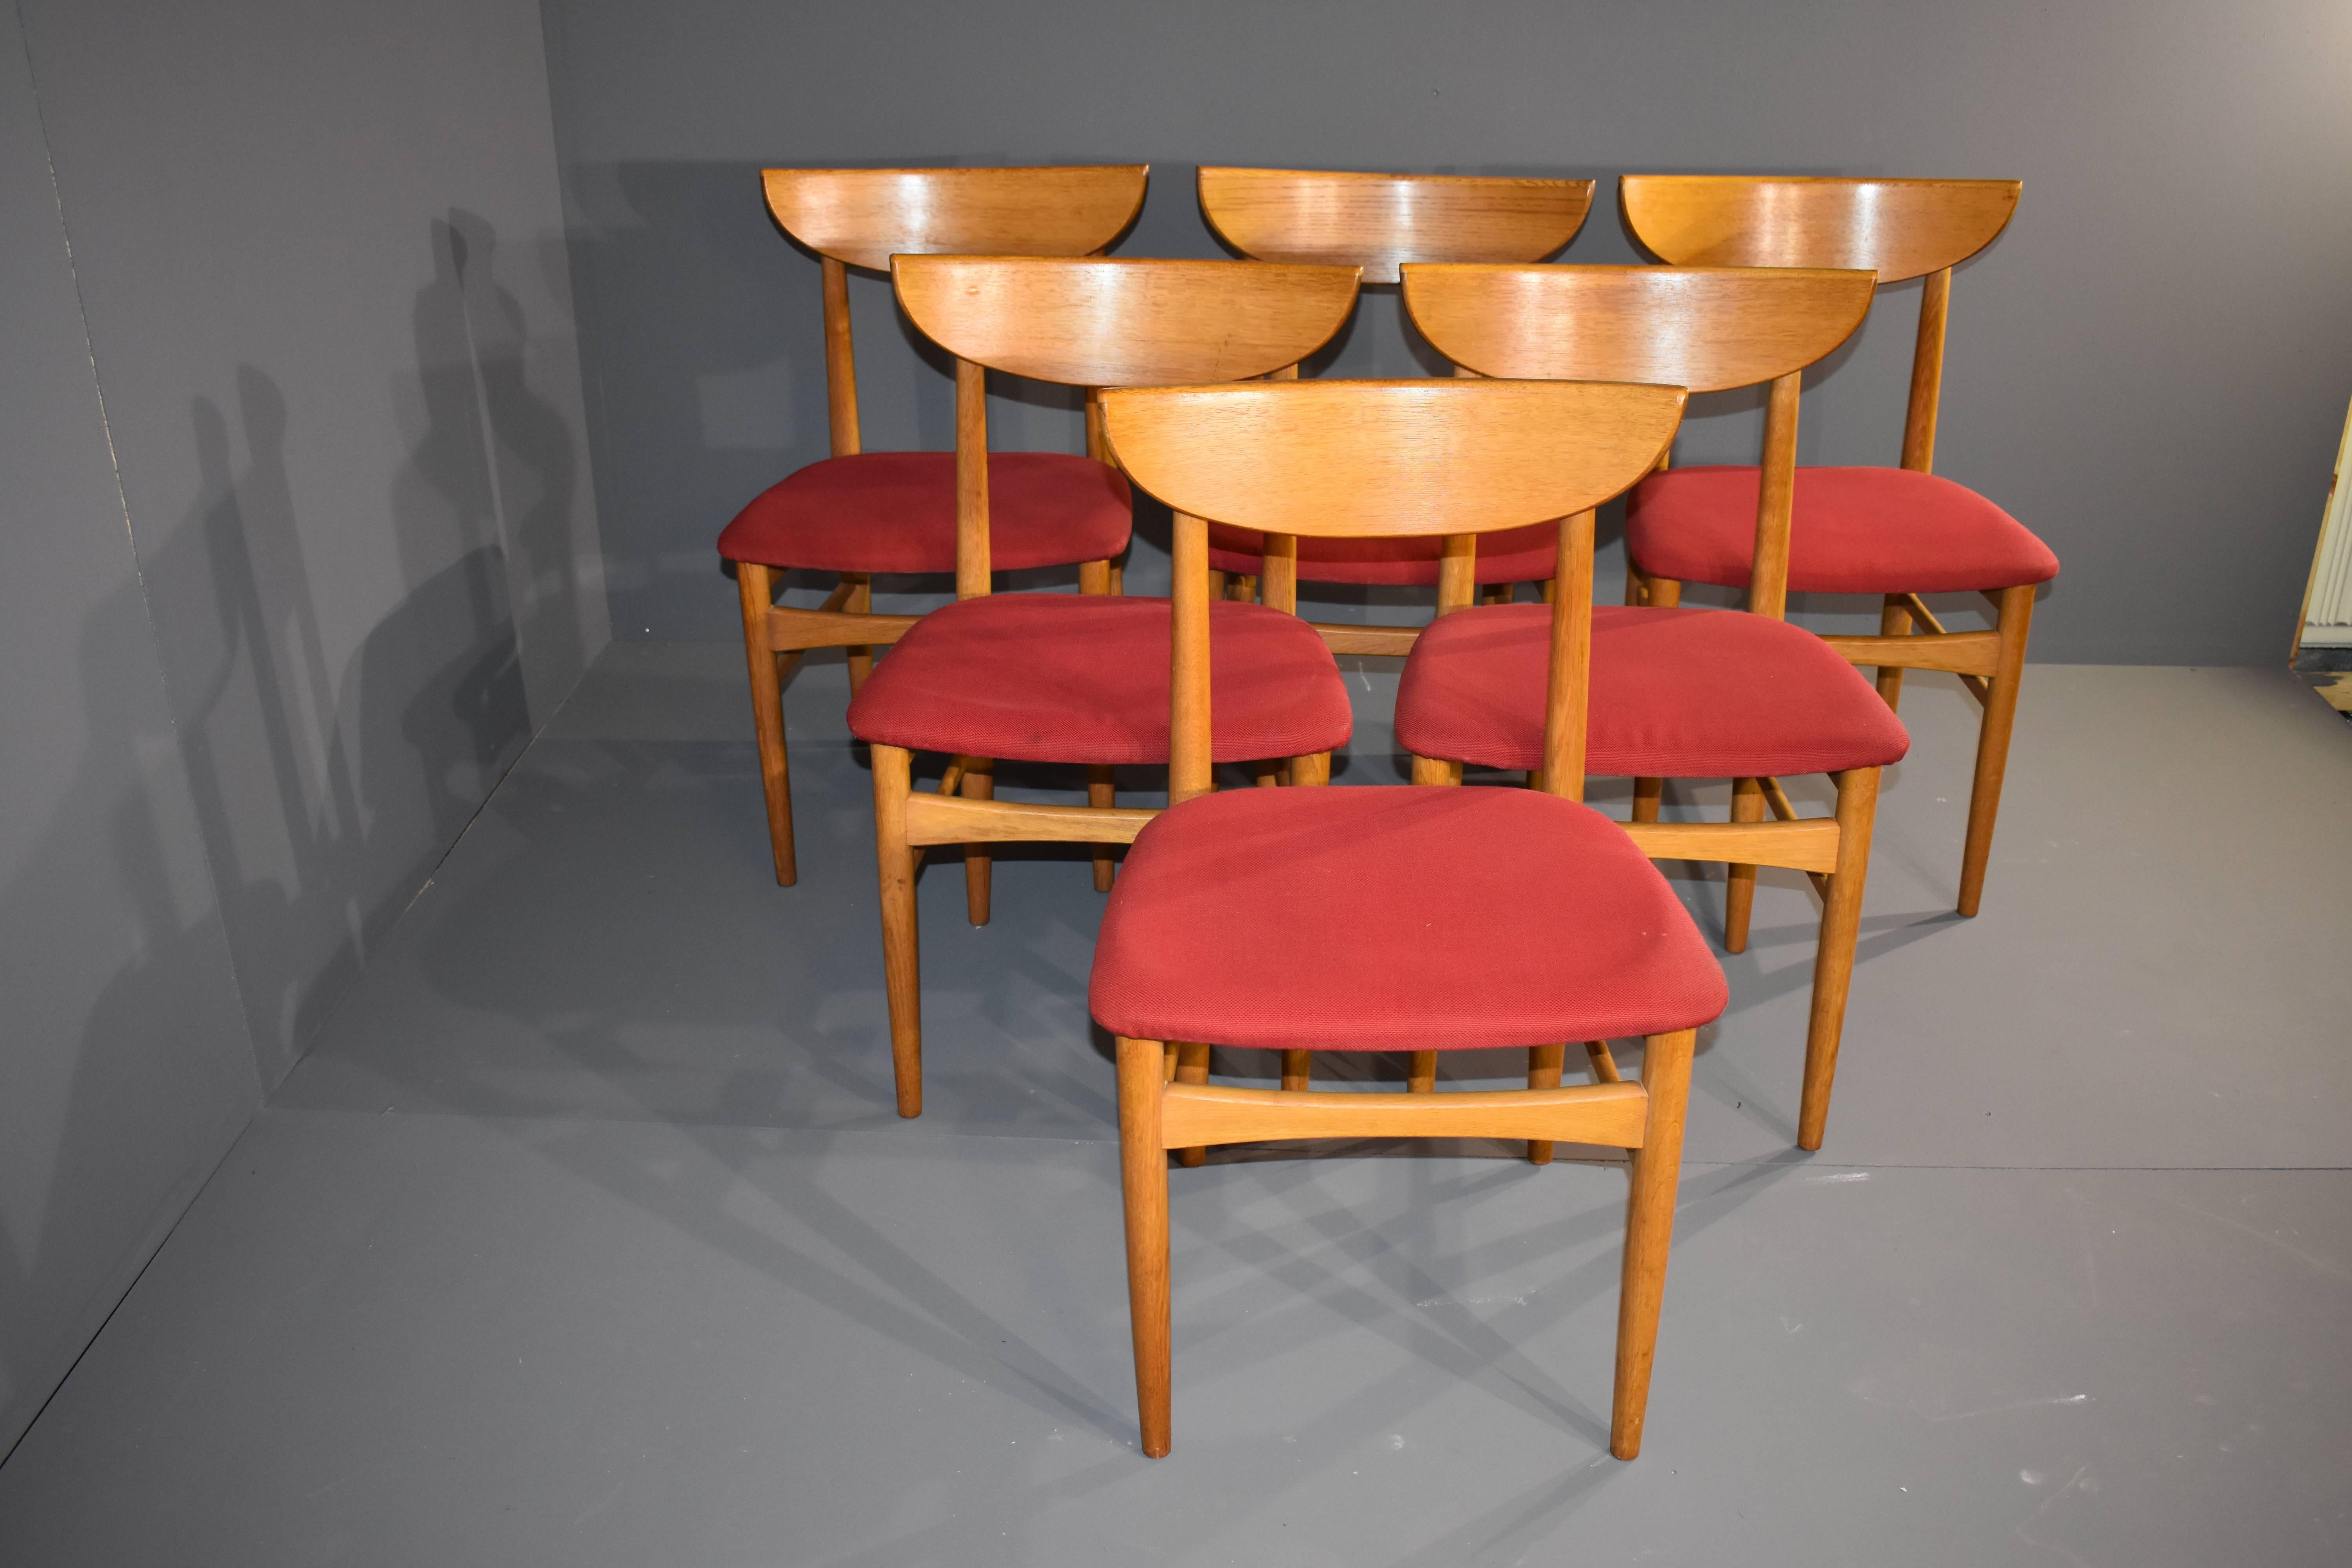 Harry Østergaard for Skovby dining chairs oak. Red fabric upholstery, cleaned, condition consistent with age and use.
The chairs are made in oak, and are in a very good condition.